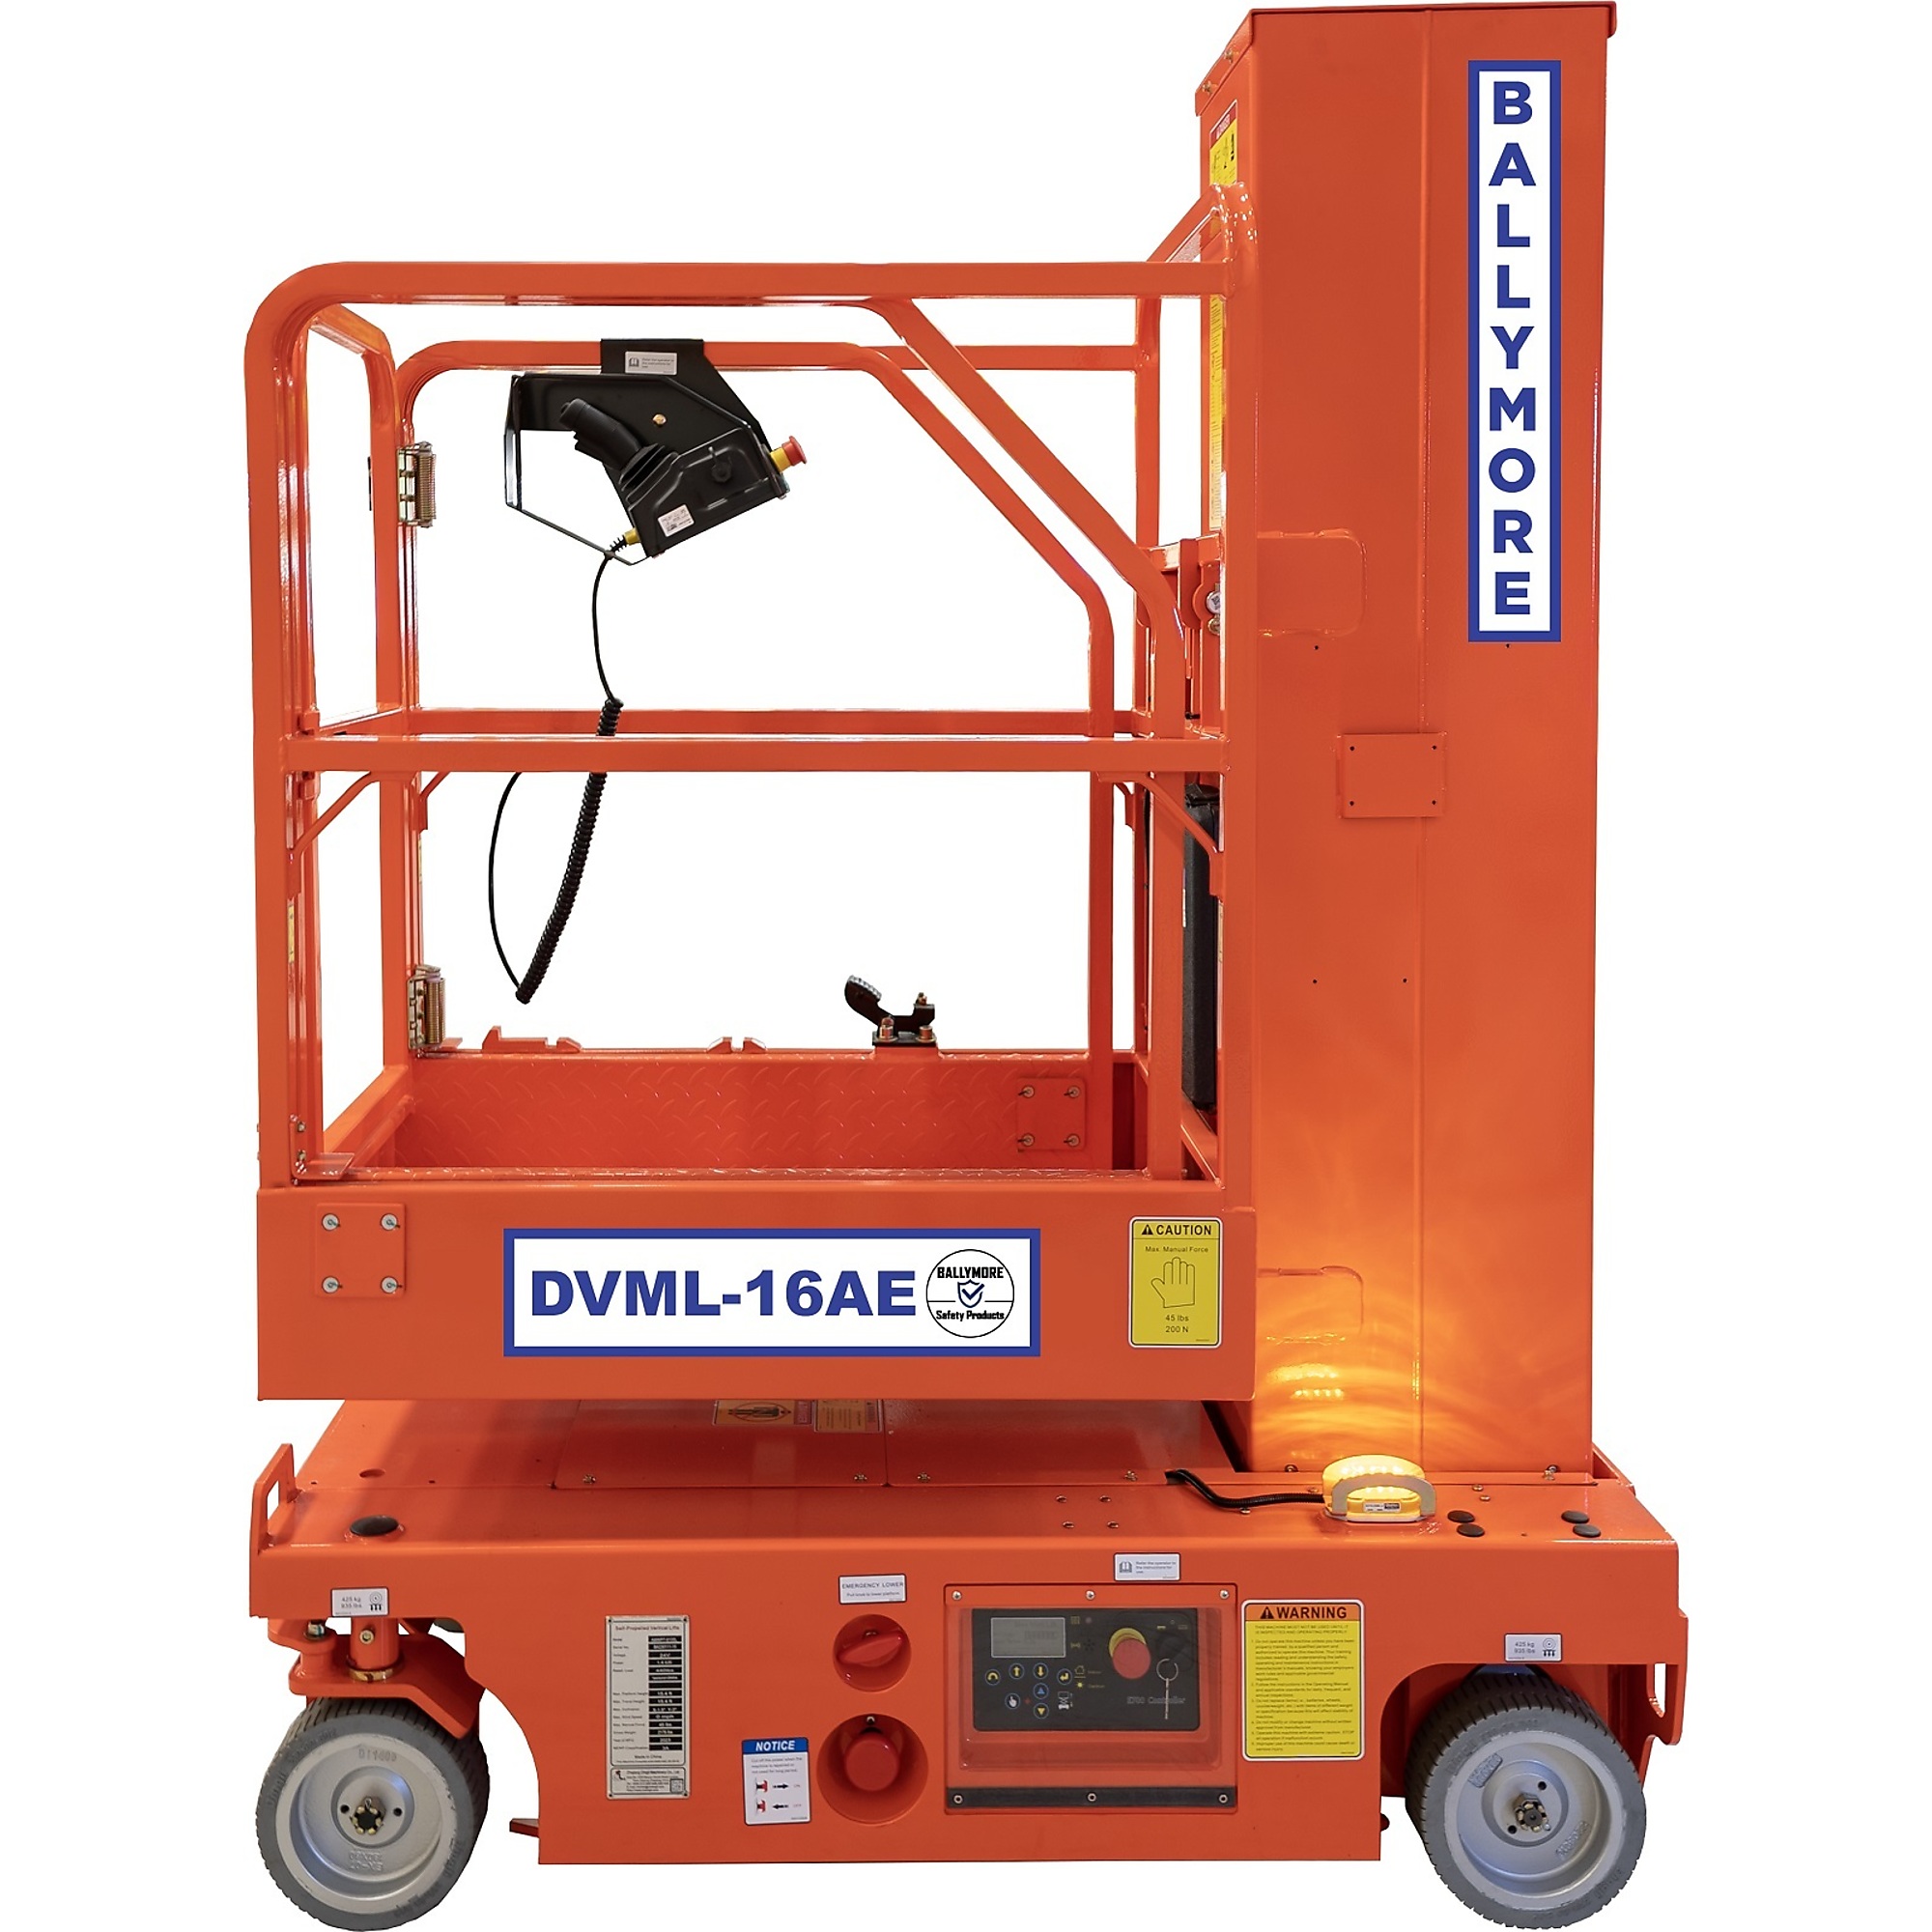 Ballymore, Drivable Mast Lift, Capacity 500 lb, Working Height 22 ft, Platform Height 16 in, Model DVML-16AE